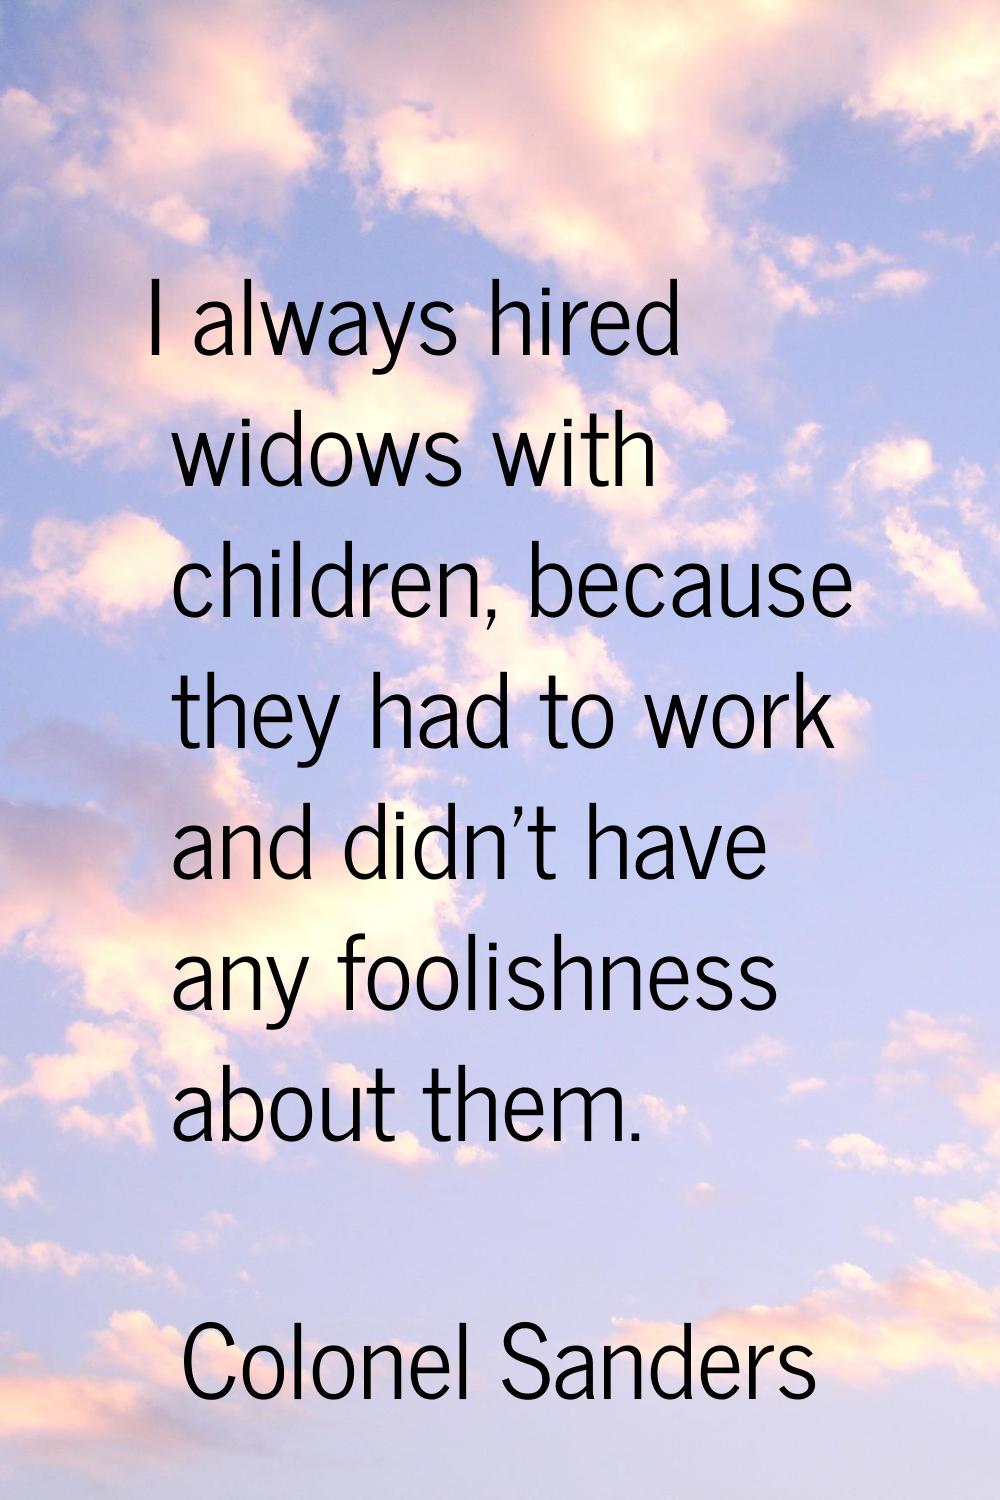 I always hired widows with children, because they had to work and didn't have any foolishness about